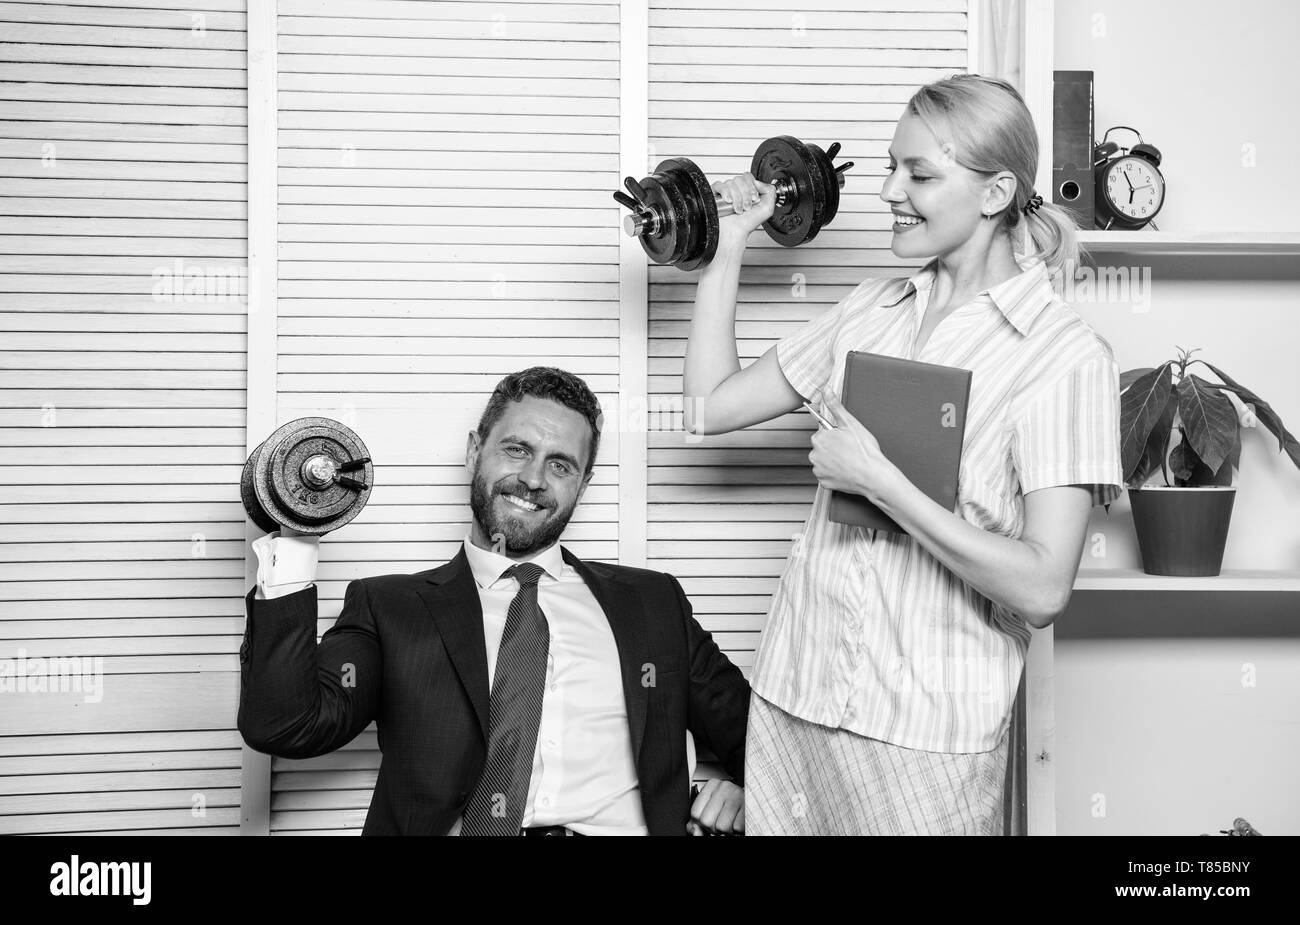 Man and woman raise heavy dumbbells. Strong powerful business strategy. Good job concept. Boss businessman and office manager raise hand with dumbbells. Strong business team. Healthy habits in office. Stock Photo